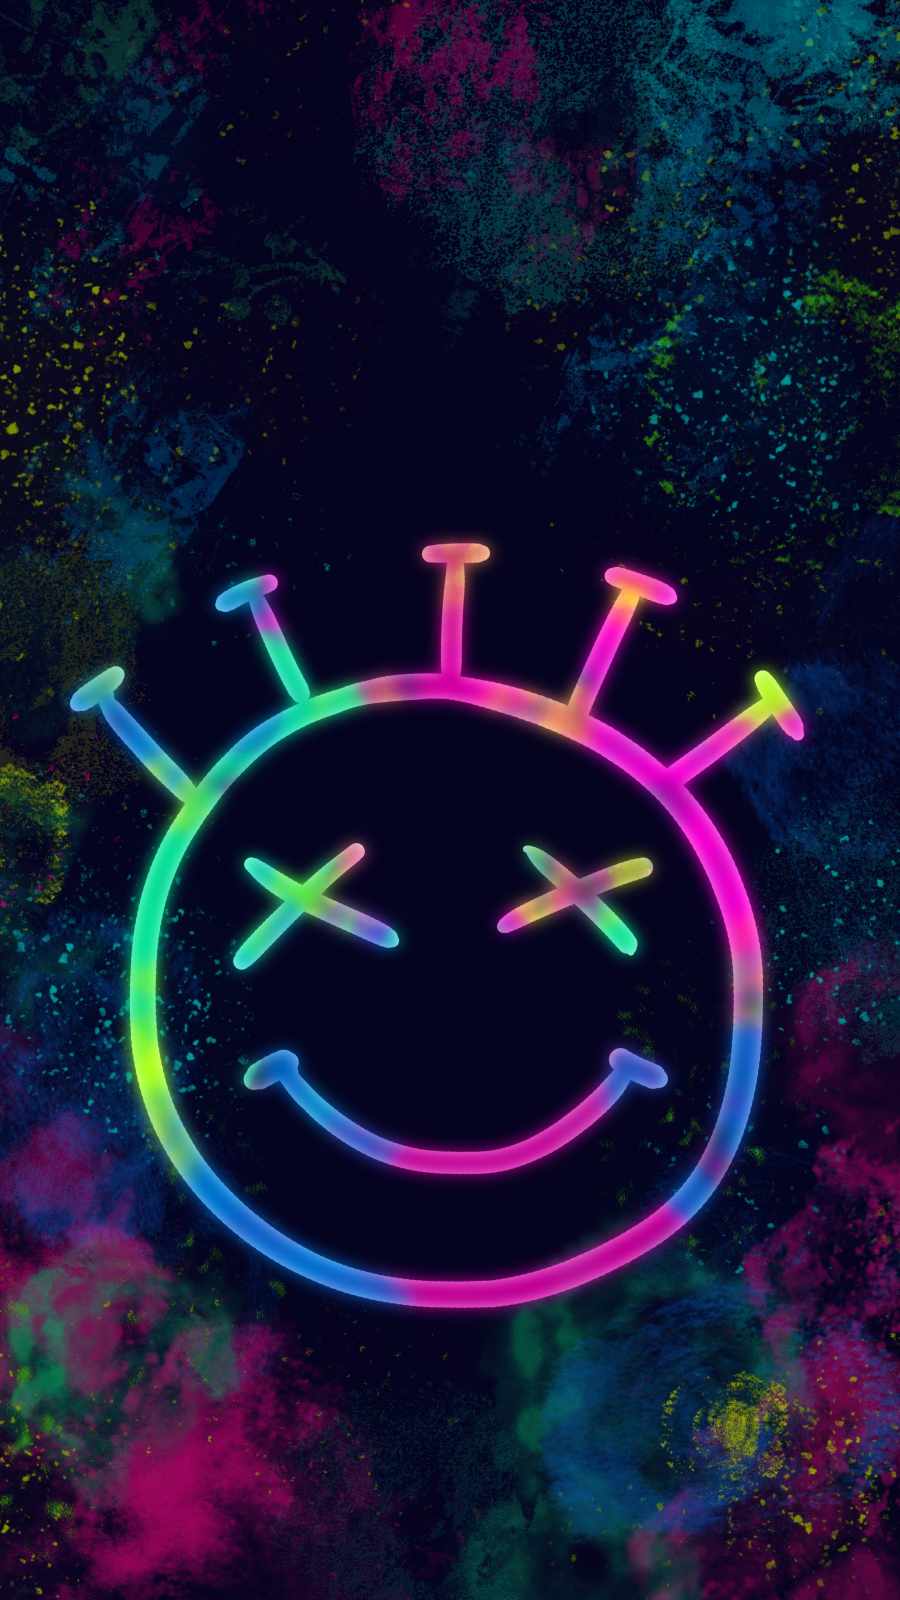 Neon Face IPhone 13 Wallpaper - IPhone Wallpapers : iPhone Wallpapers